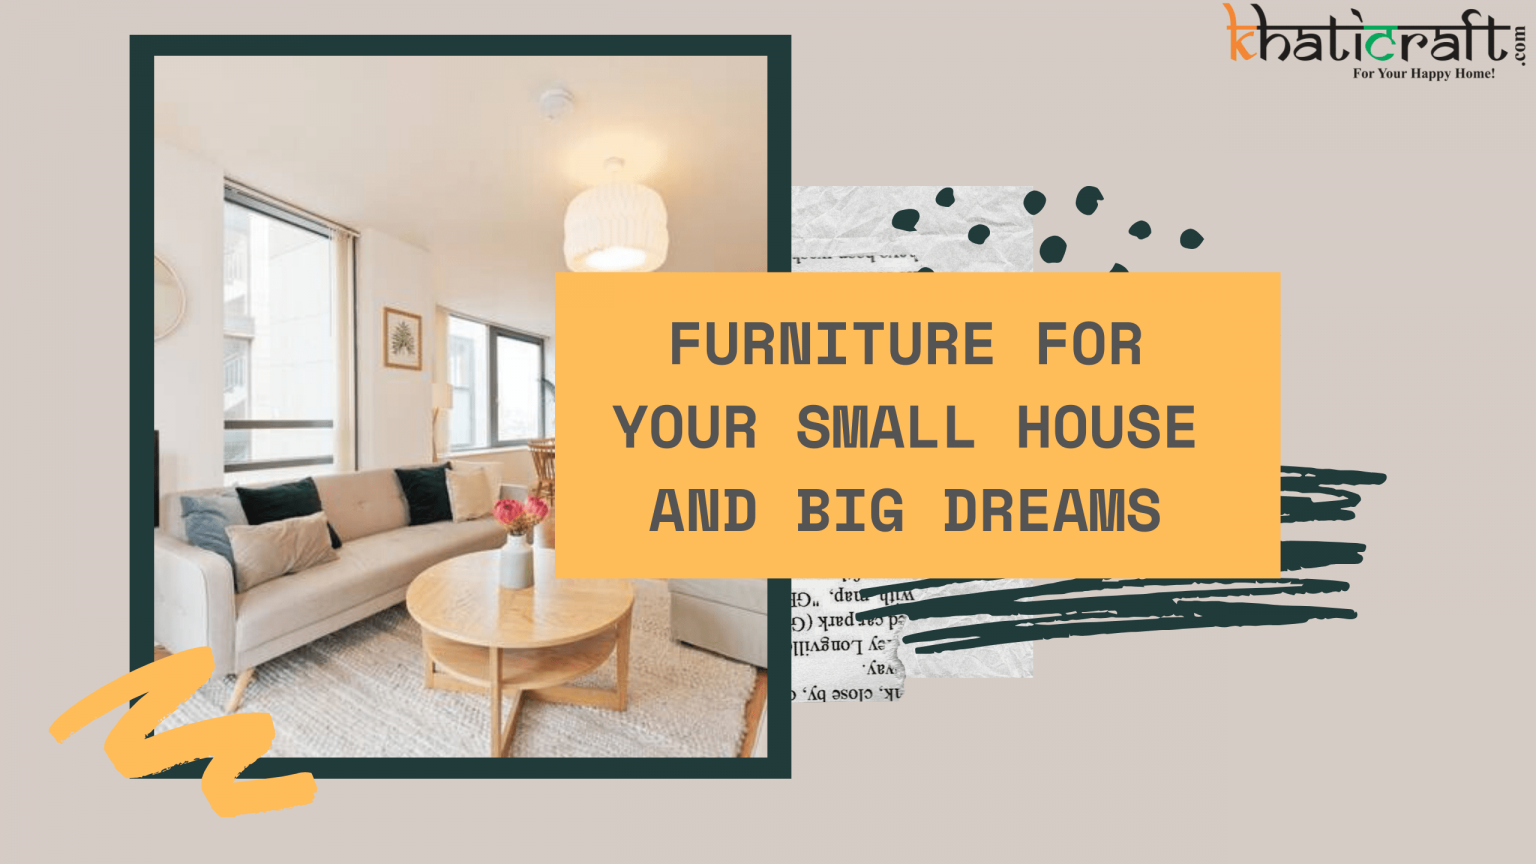 Furniture for Your Small House and Big Dreams